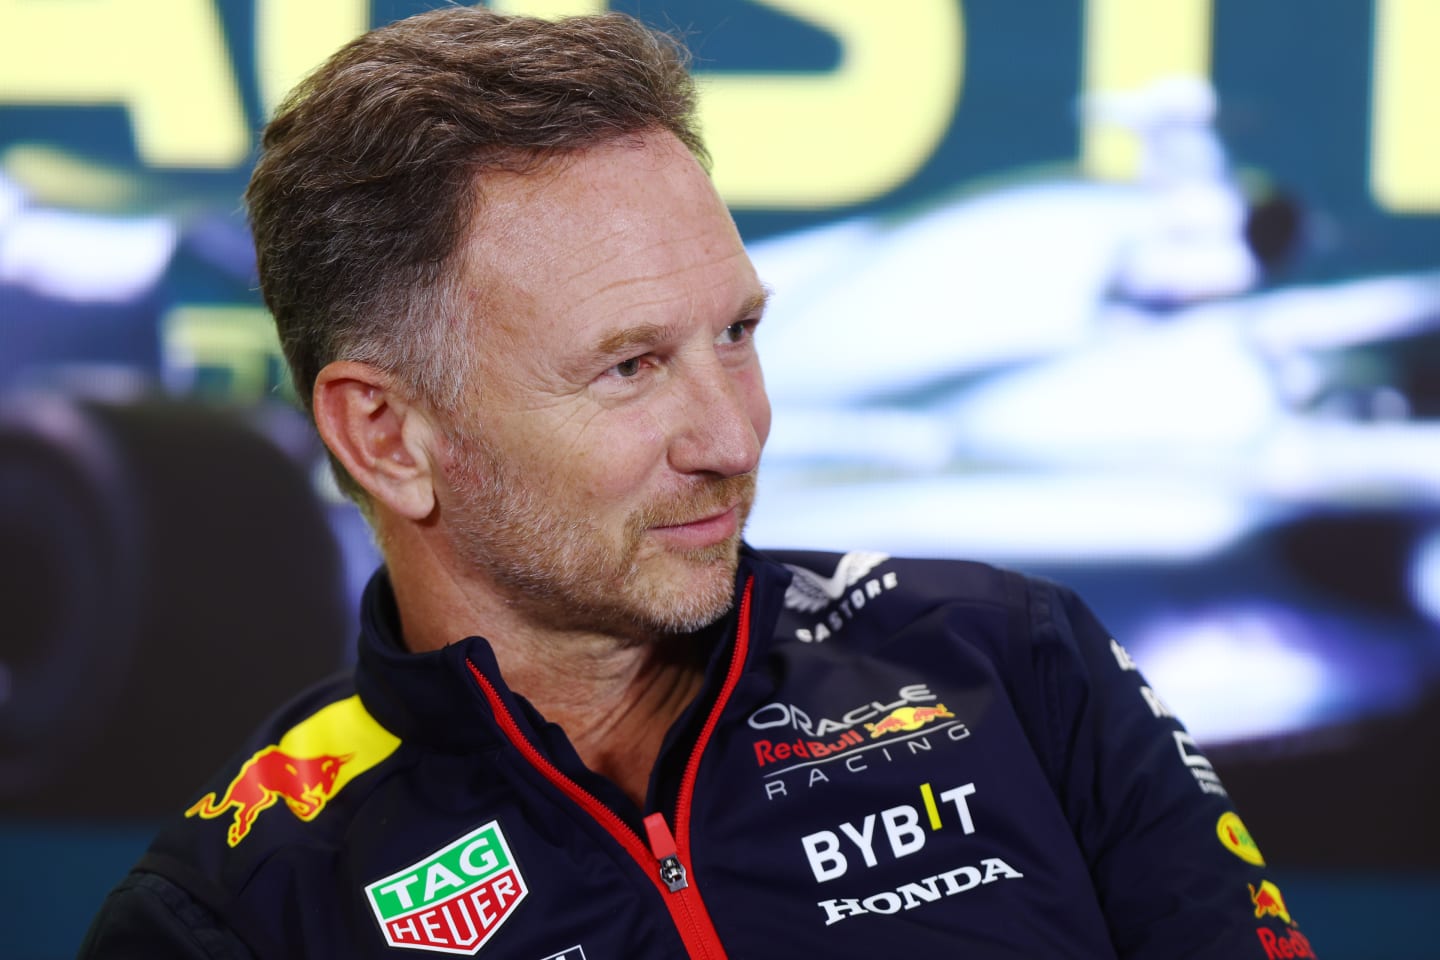 MELBOURNE, AUSTRALIA - MARCH 31: Red Bull Racing Team Principal Christian Horner looks on in the Team Principals Press Conference during practice ahead of the F1 Grand Prix of Australia at Albert Park Grand Prix Circuit on March 31, 2023 in Melbourne, Australia. (Photo by Dan Istitene/Getty Images)